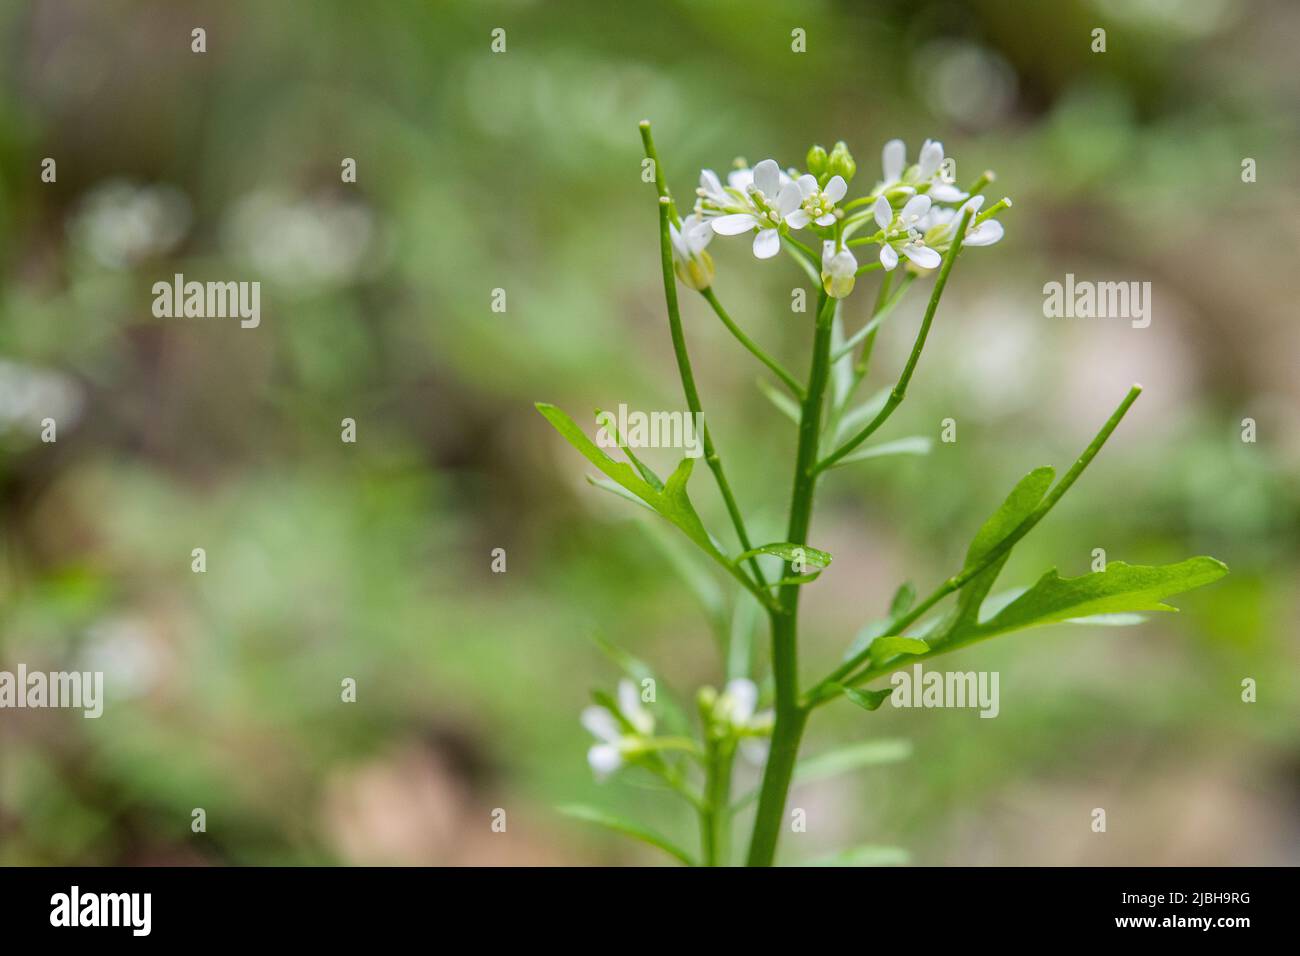 Cardamine flexuosa, commonly known as wavy bittercress or wood bitter-cress. Stock Photo